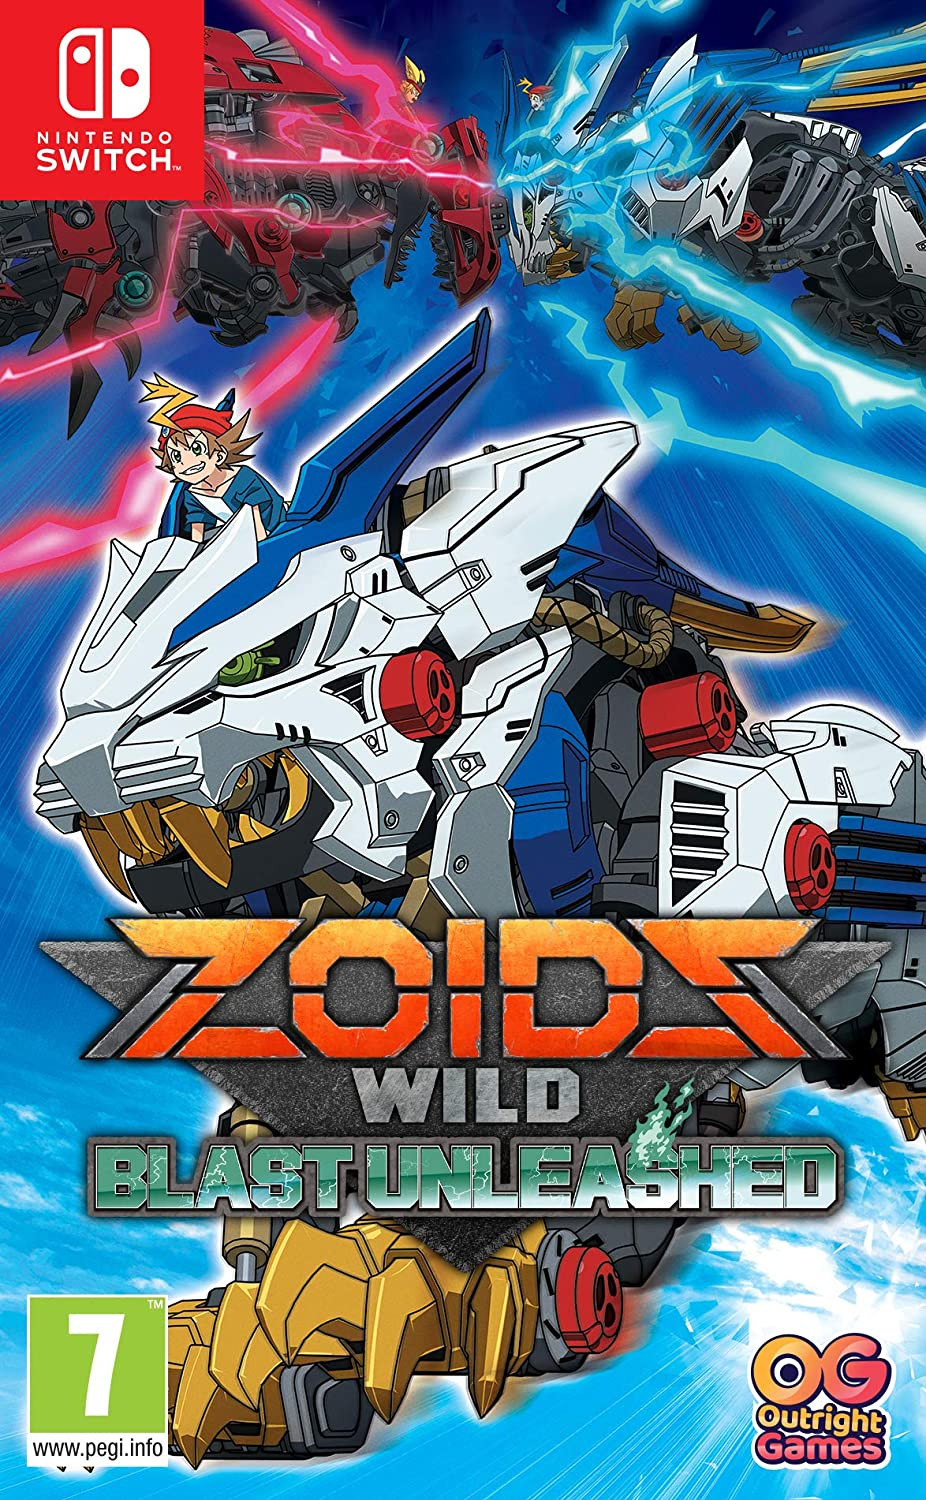 Outright Games Zoids Wild Blast Unleashed